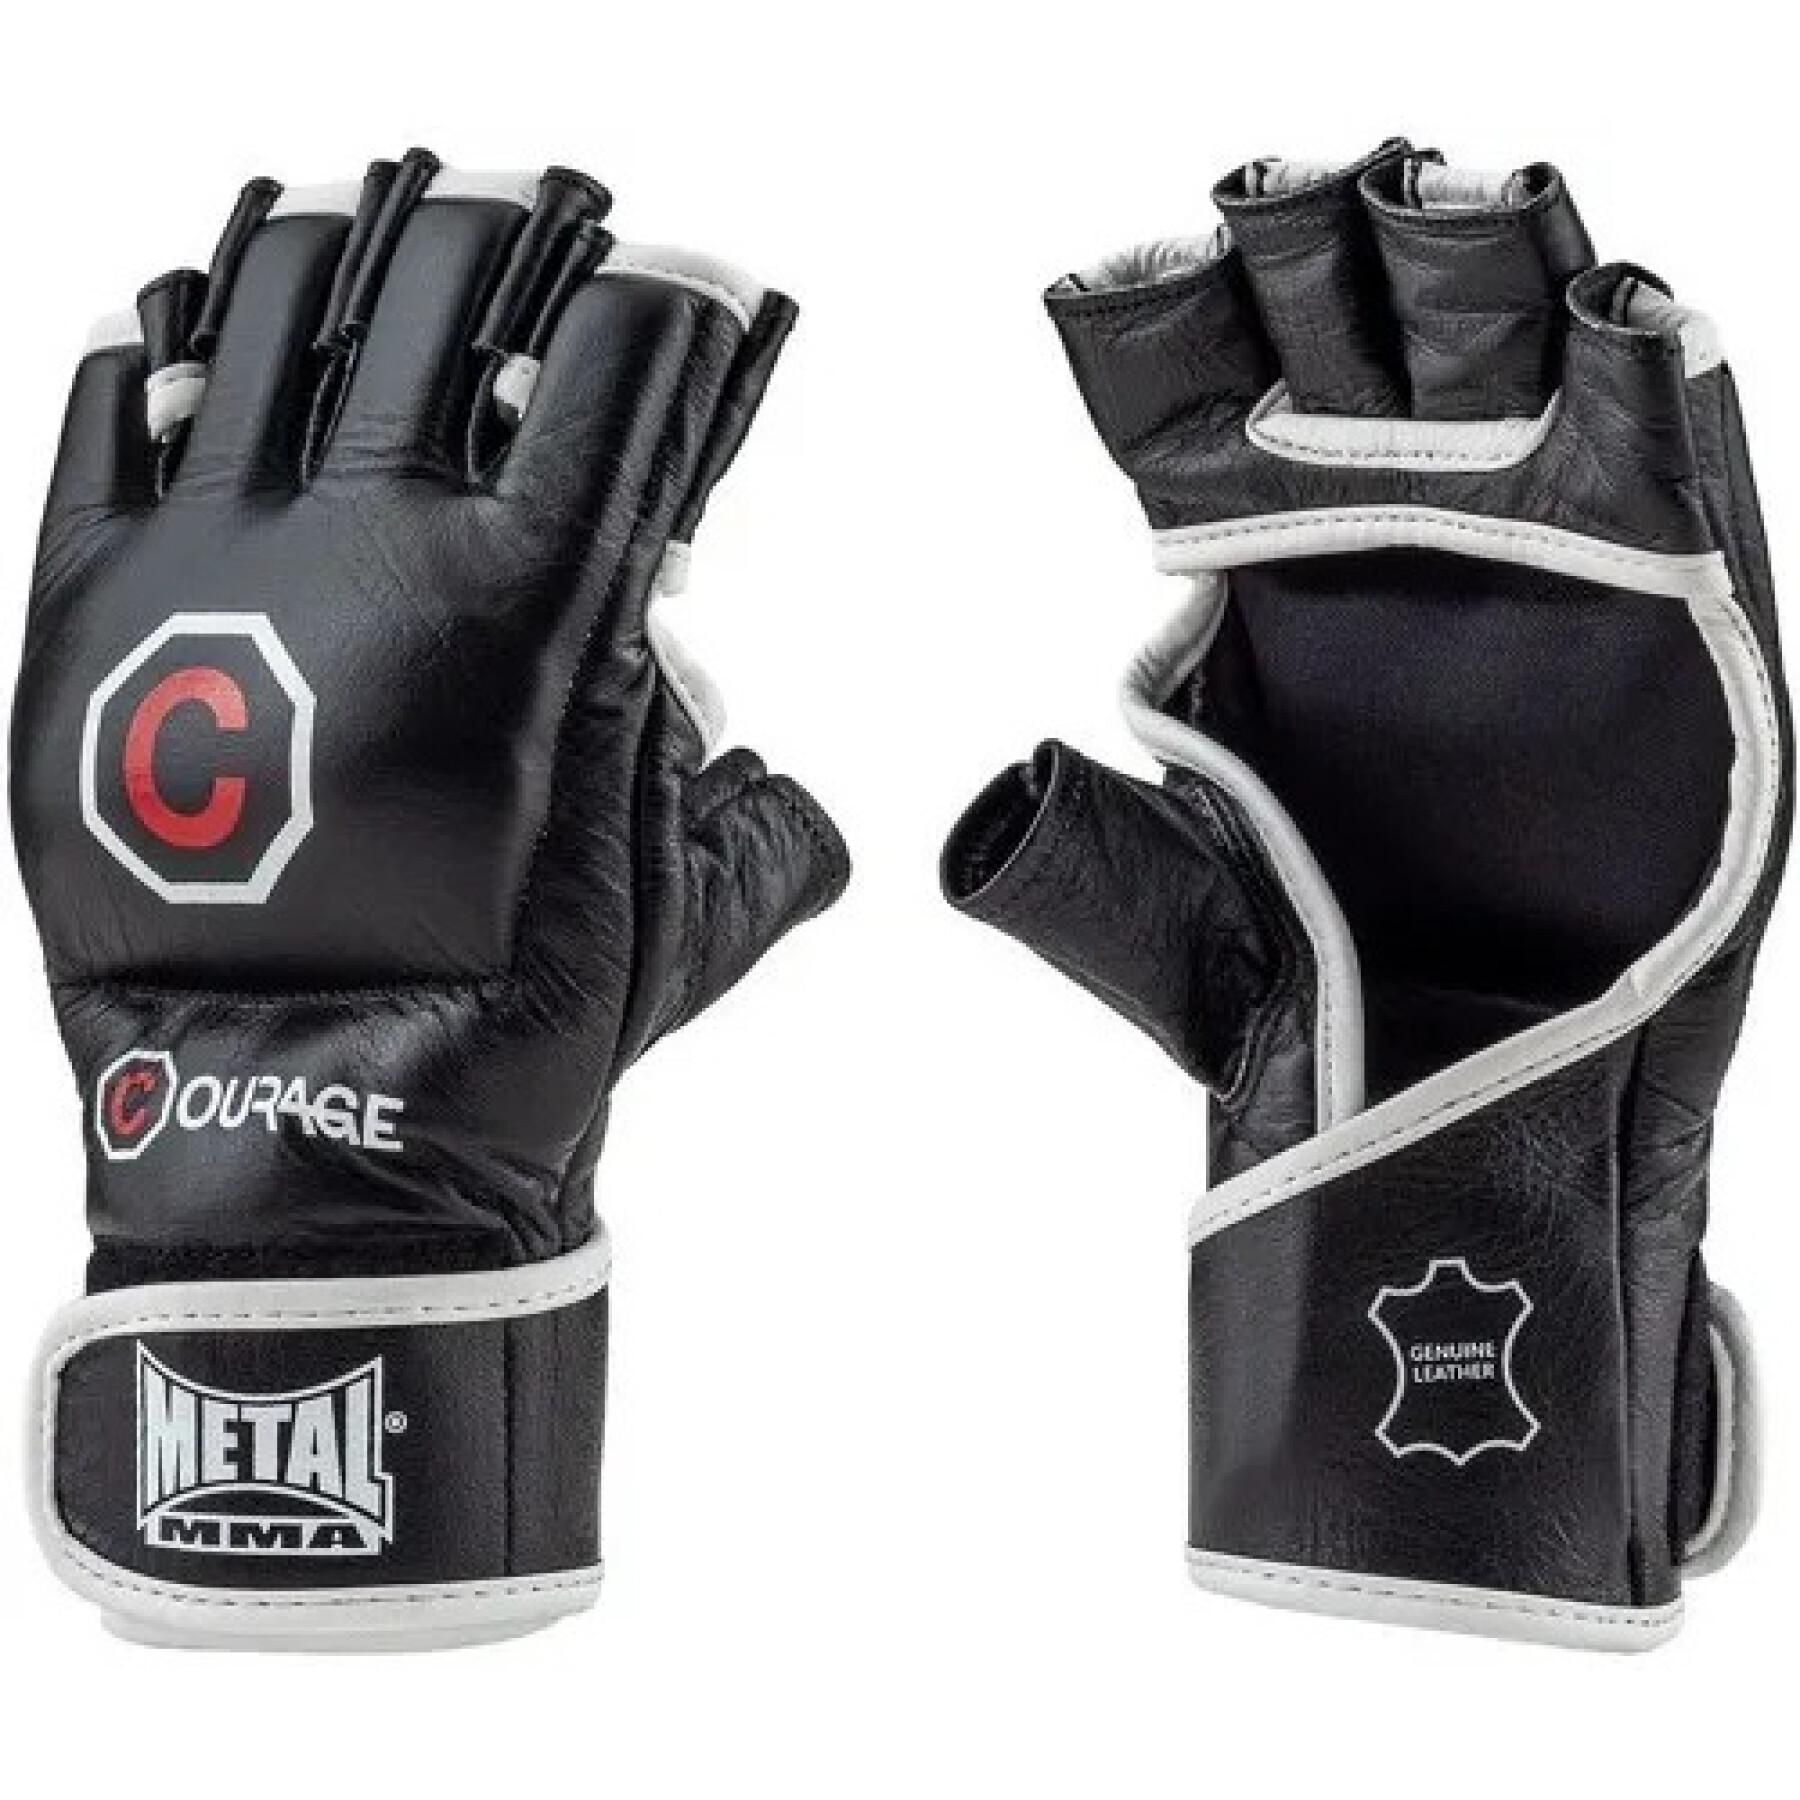 Leather mma gloves Metal Boxe courage